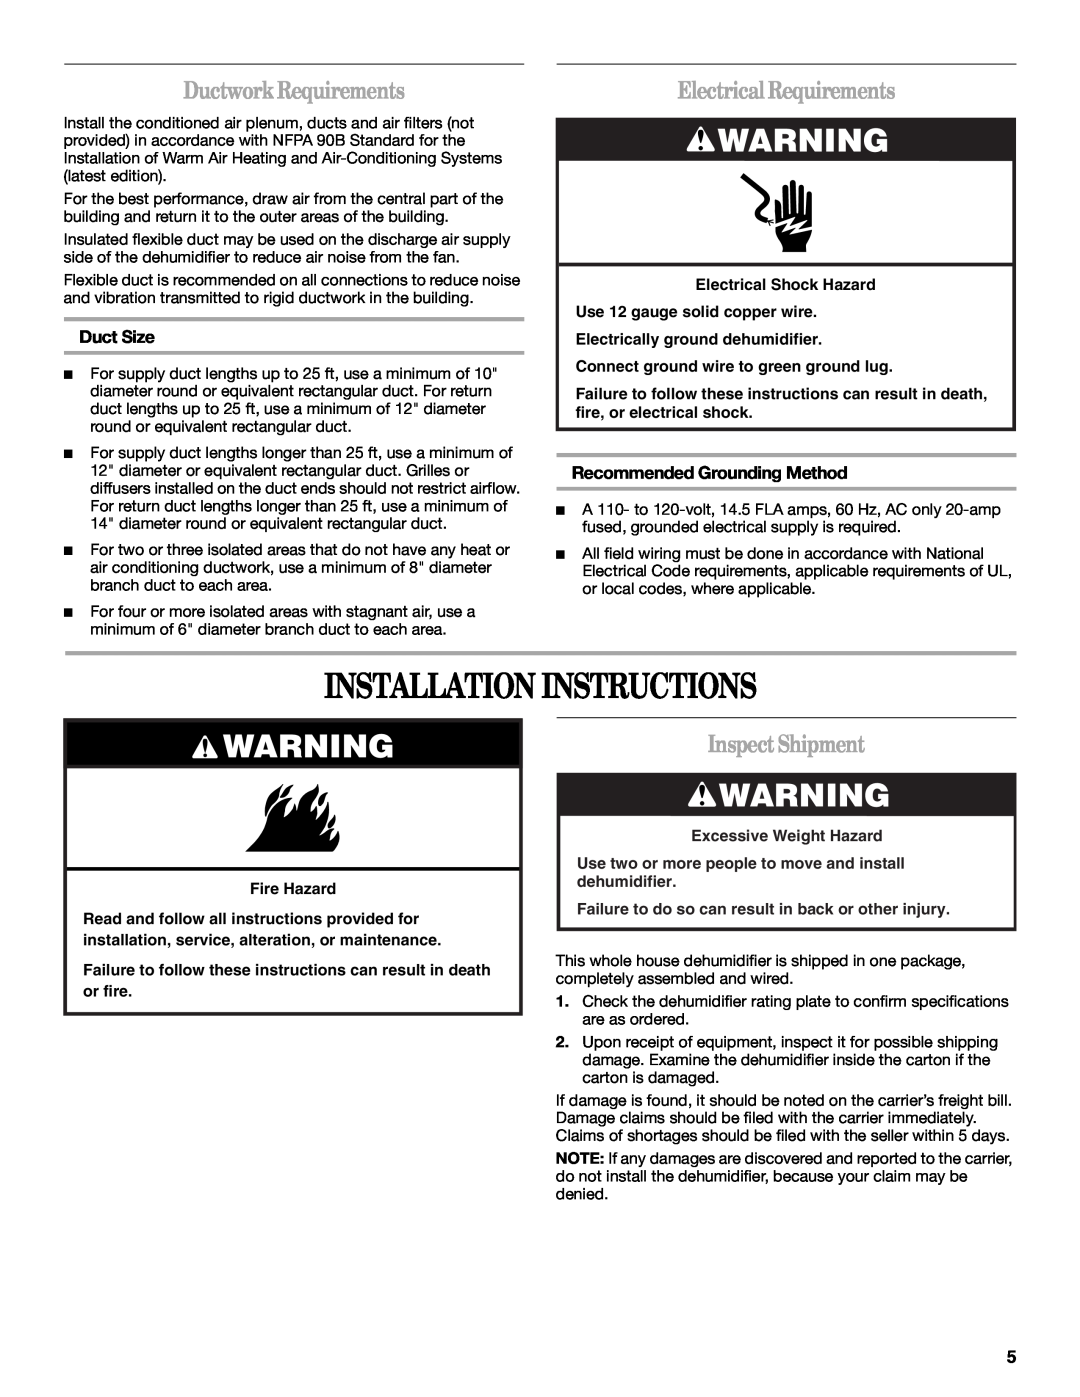 Whirlpool WPDV160XS Installation Instructions, DuctworkRequirements, ElectricalRequirements, InspectShipment, Duct Size 